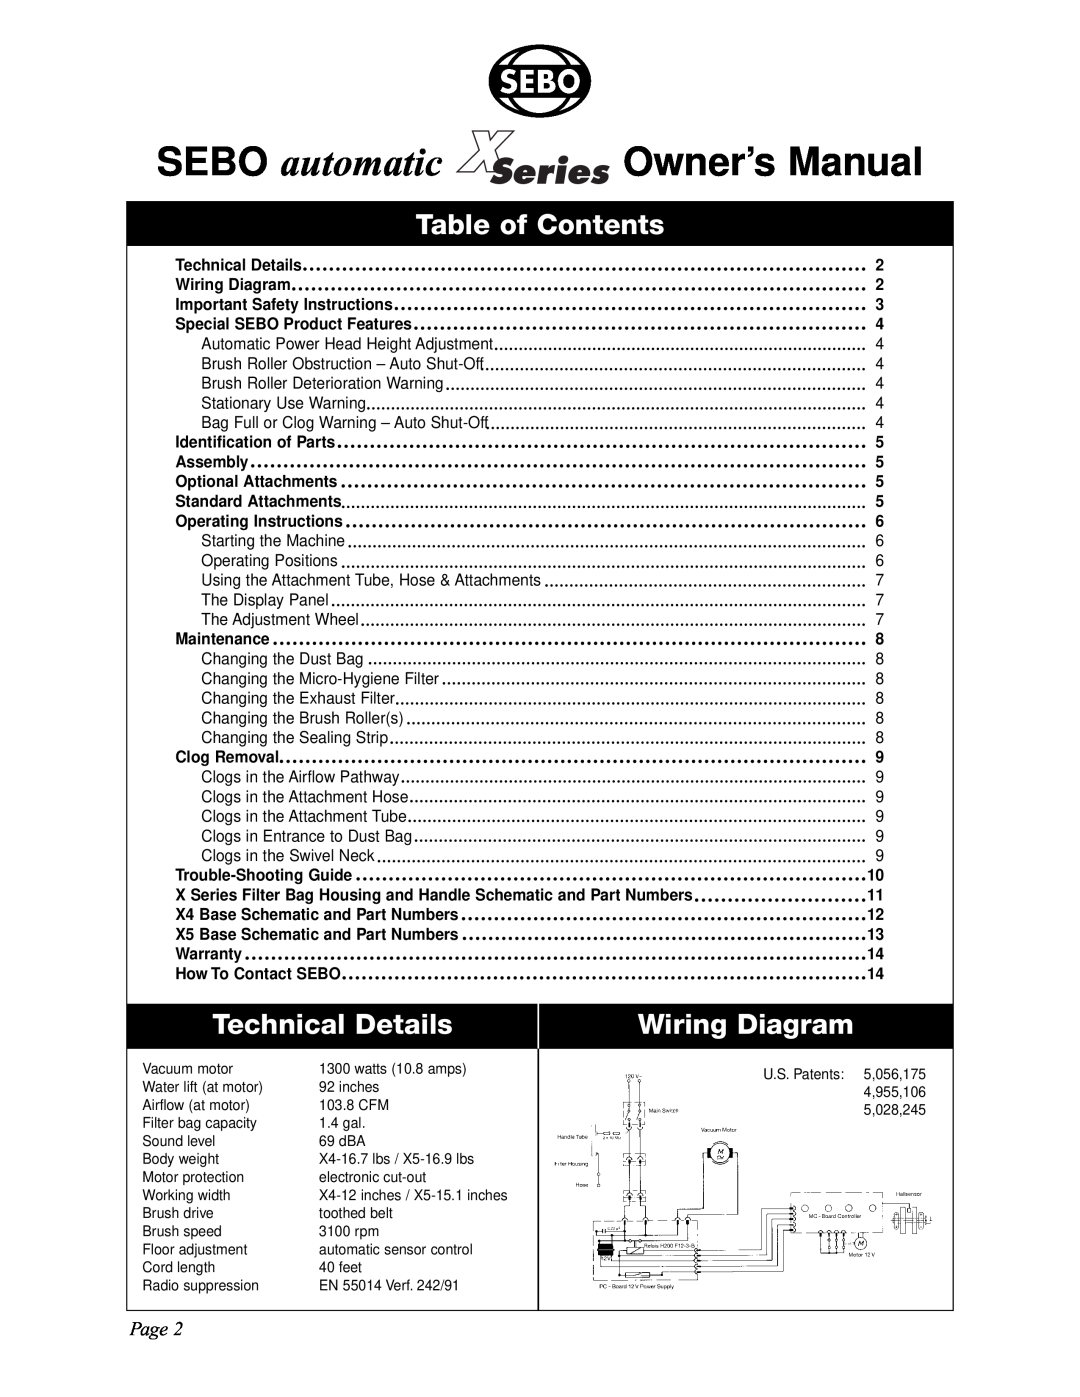 Sebo X5, X4 manual Table of Contents, Technical Details, Wiring Diagram, Page, Series 